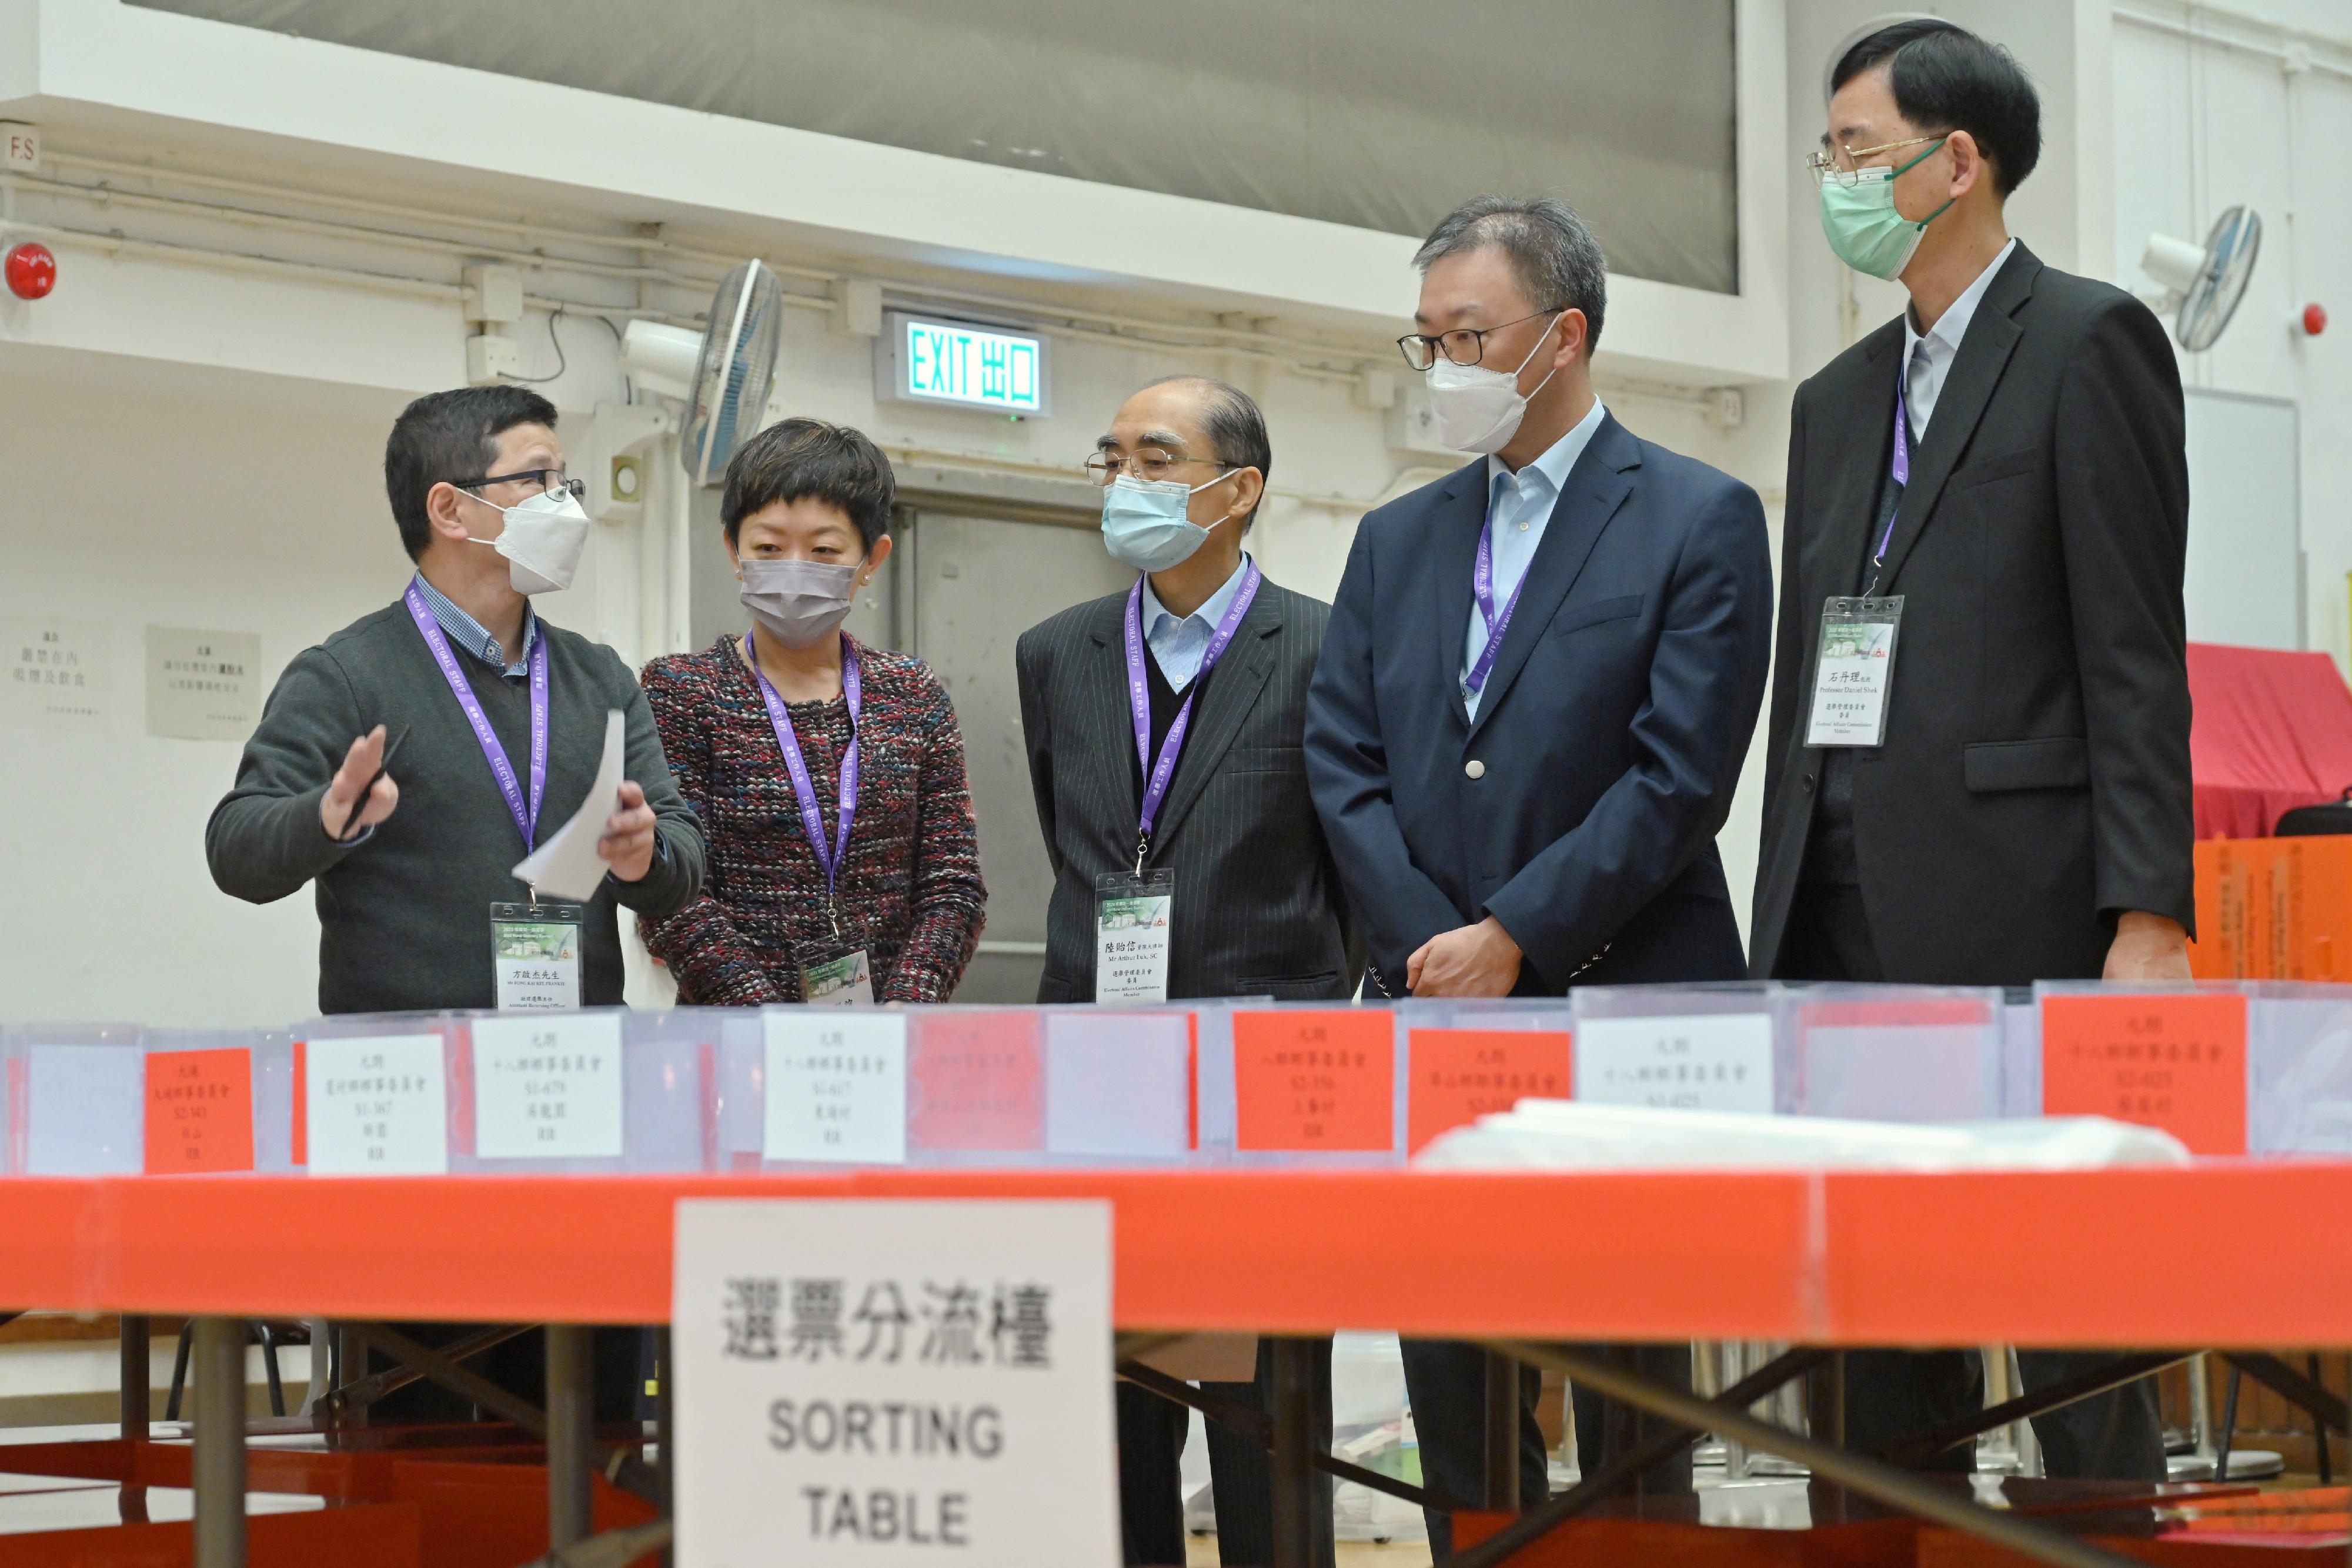 The Chairman of the Electoral Affairs Commission (EAC), Mr Justice David Lok (second right), EAC members Mr Arthur Luk, SC (third right), and Professor Daniel Shek (first right) today (January 8) visited the ballot paper sorting station of the Village Representative Election in the 2023 Rural Ordinary Election at Hin Keng Neighbourhood Community Centre, Sha Tin. Also present was Deputy Director of Home Affairs Ms Eureka Cheung (second left).